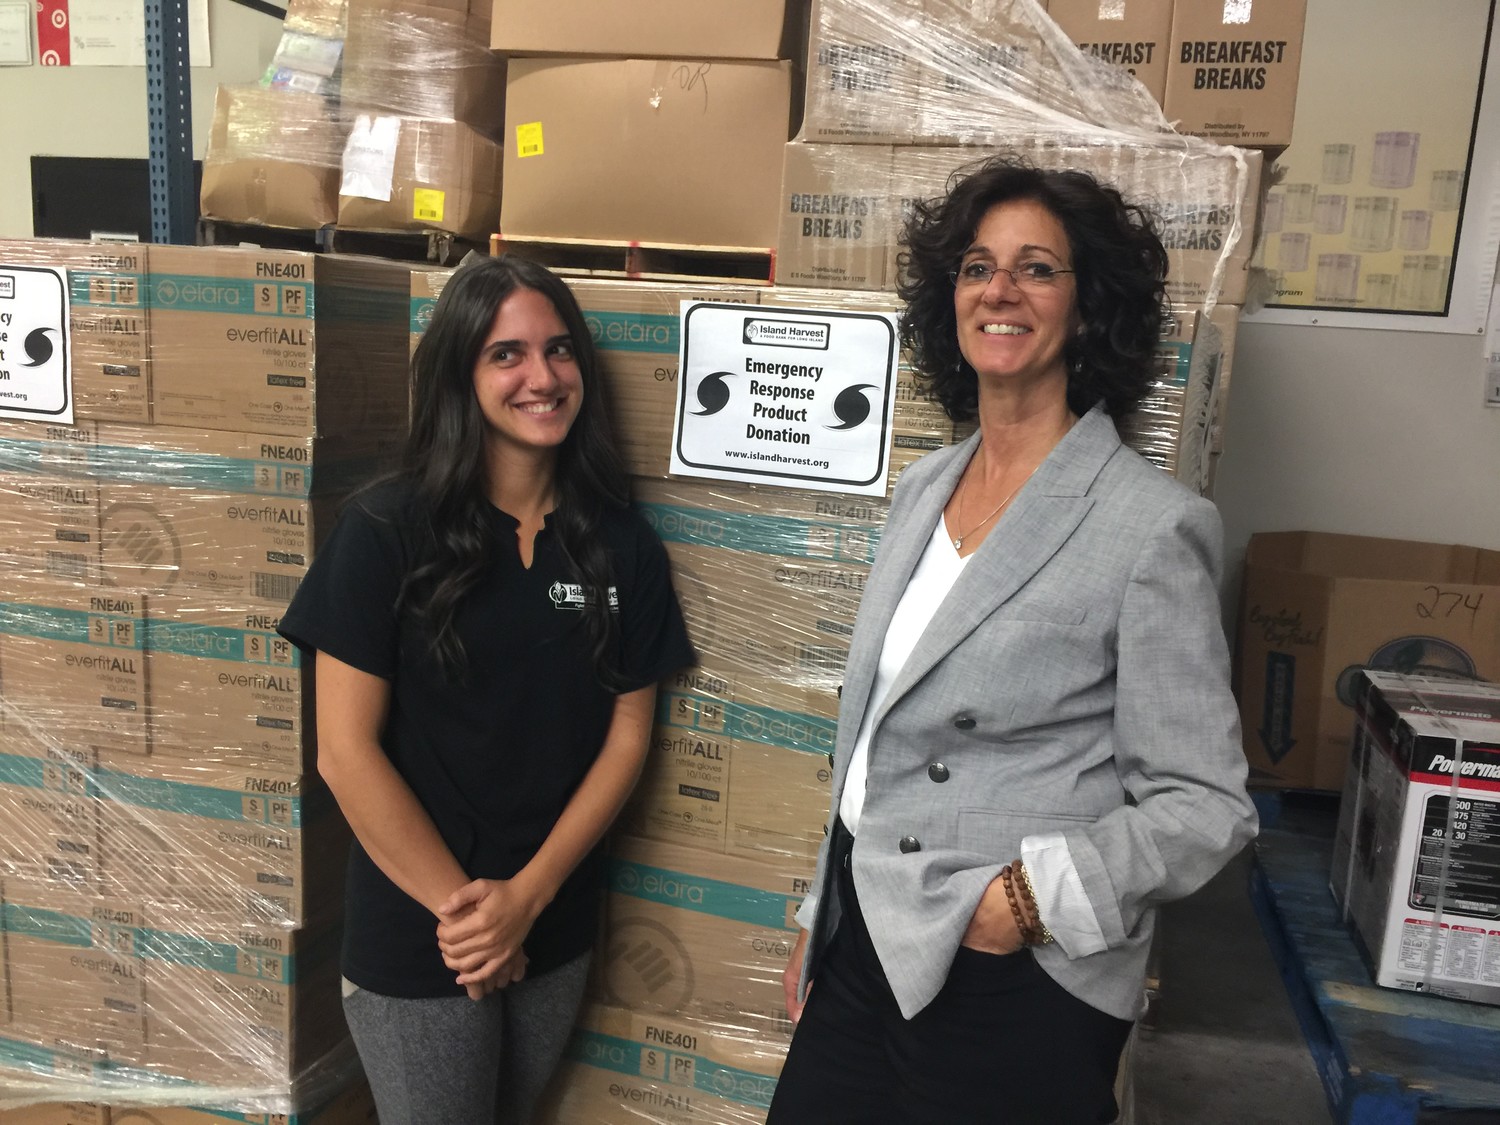 Rebecca Dresner, left, flew to Puerto Rico on Monday to help distribute food collected by the Island Harvest Food Bank. Her mother, Randi Shubin Dresner, president and CEO of the hunger-relief organization, said that Island Harvest had collected more than half a million pounds of nonperishable food, bottled water and cleaning supplies since early September to aid hurricane-stricken areas.